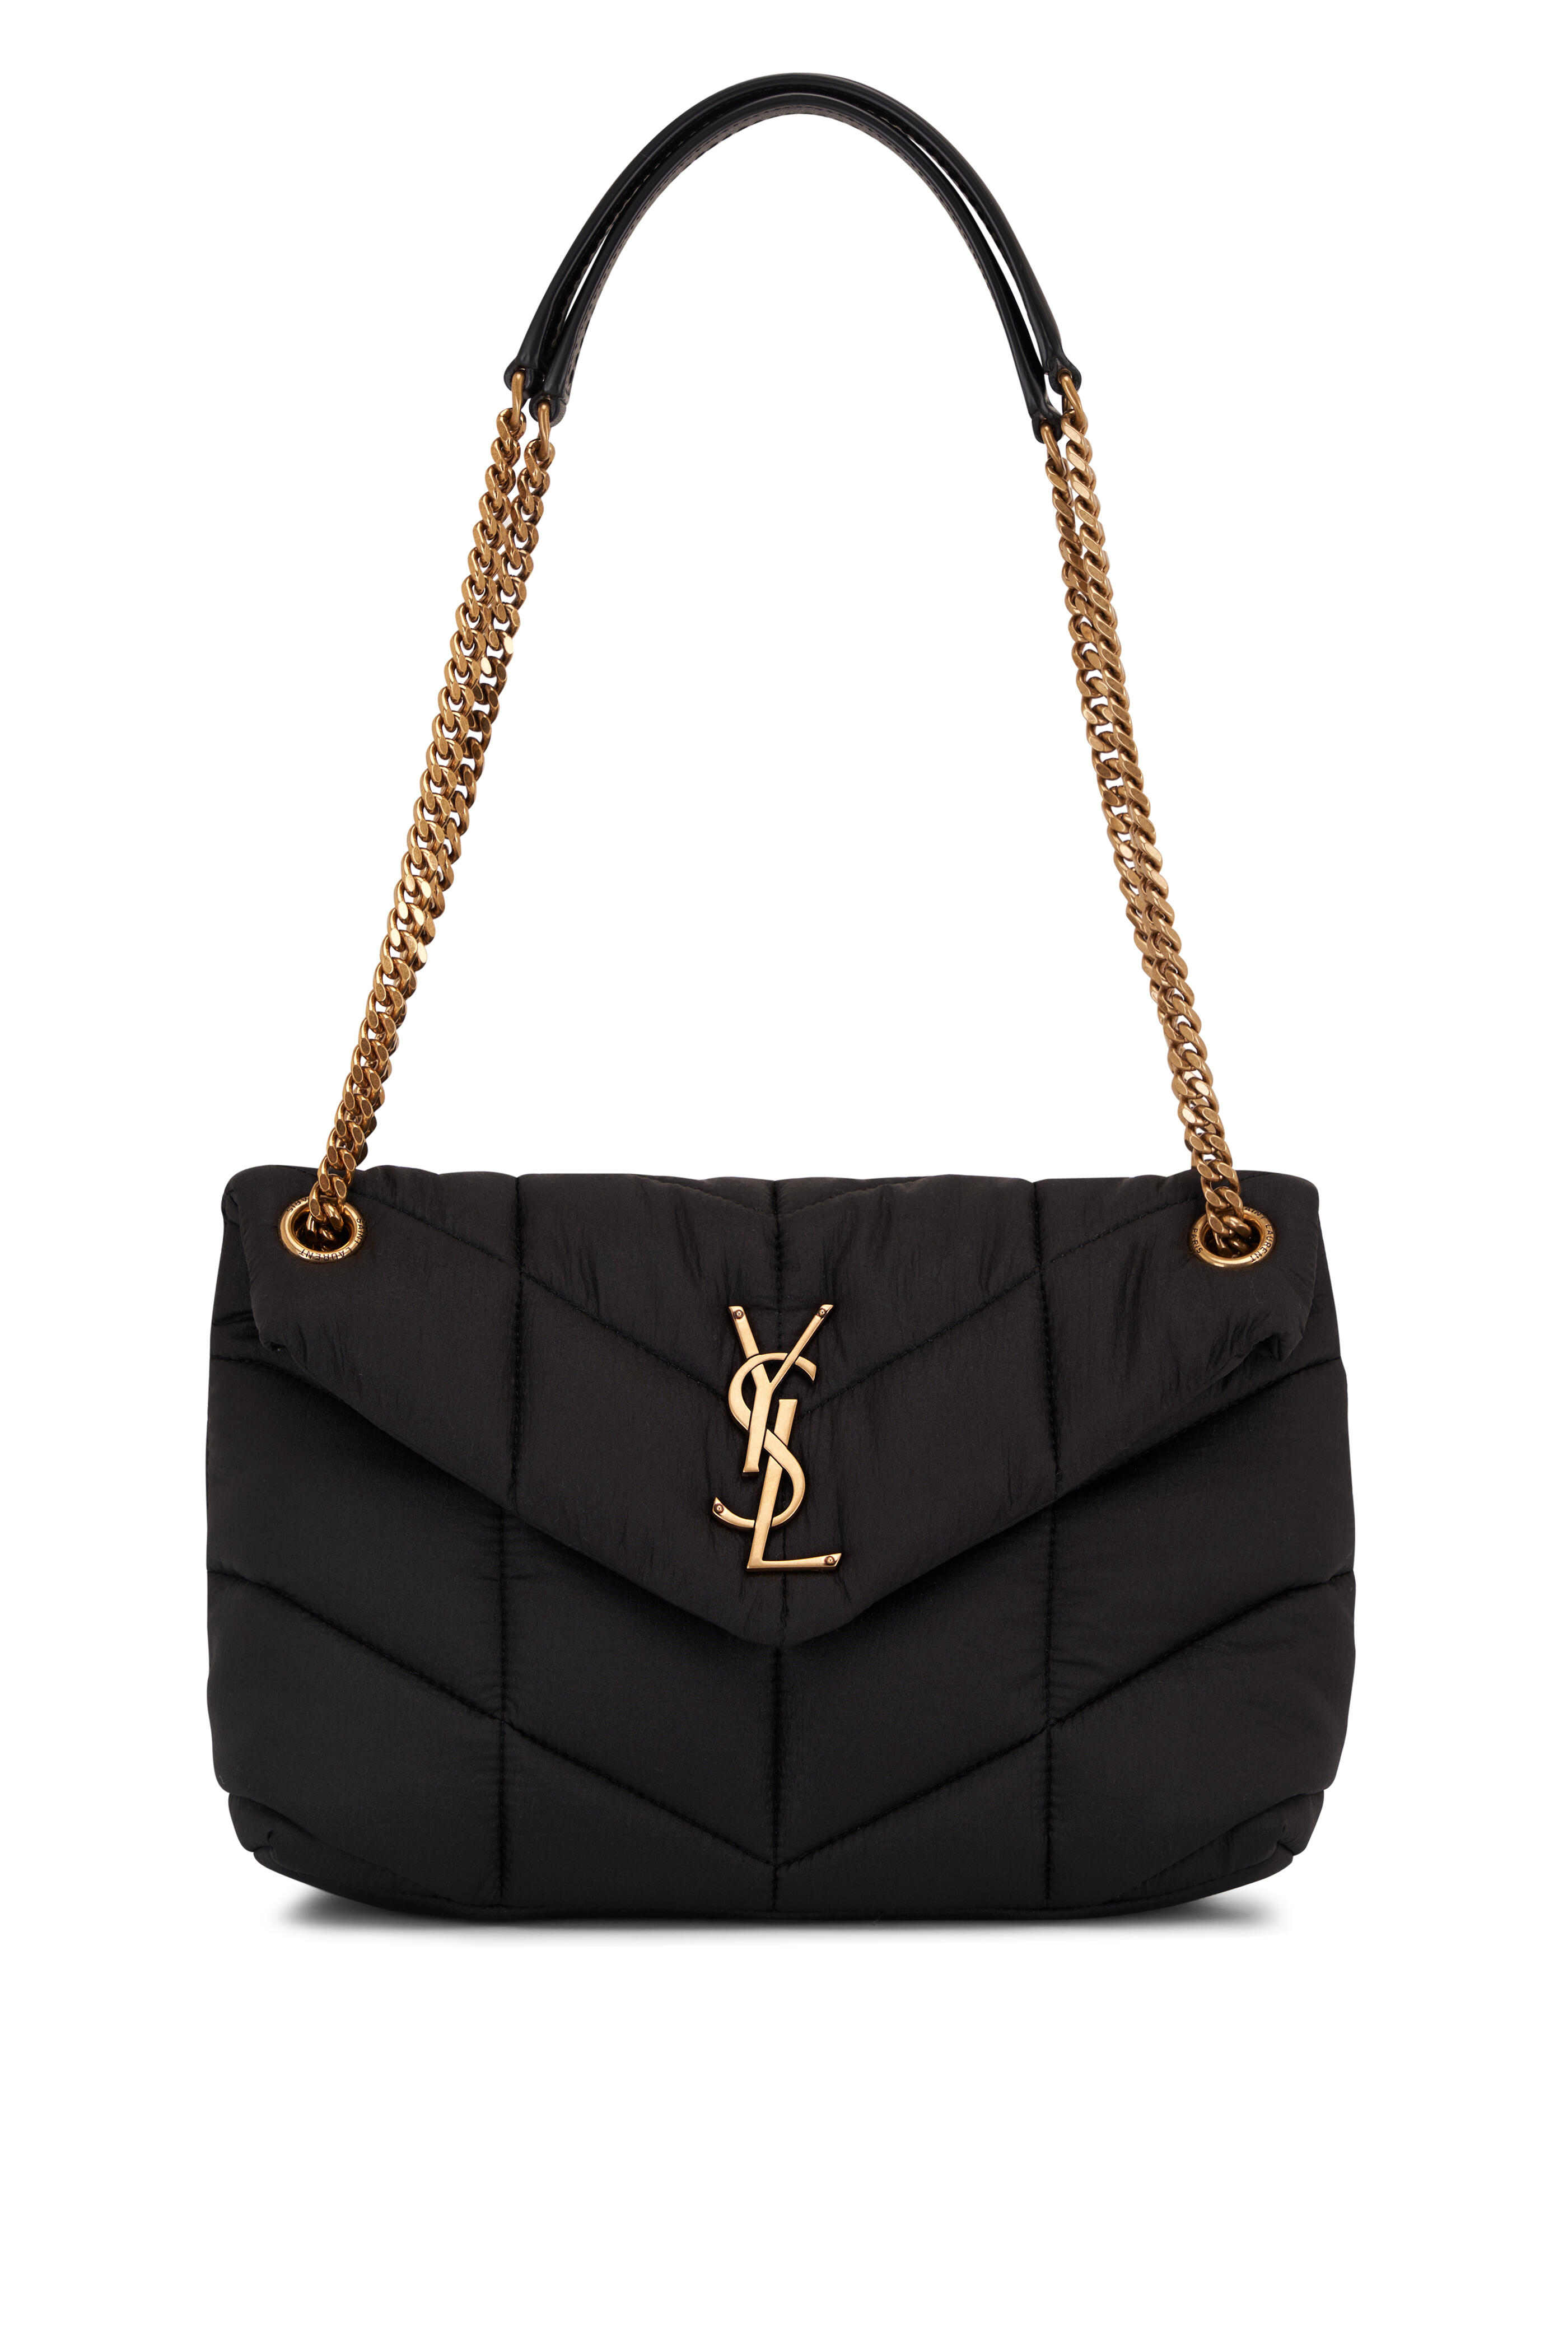 SAINT LAURENT Puffer small quilted leather shoulder bag